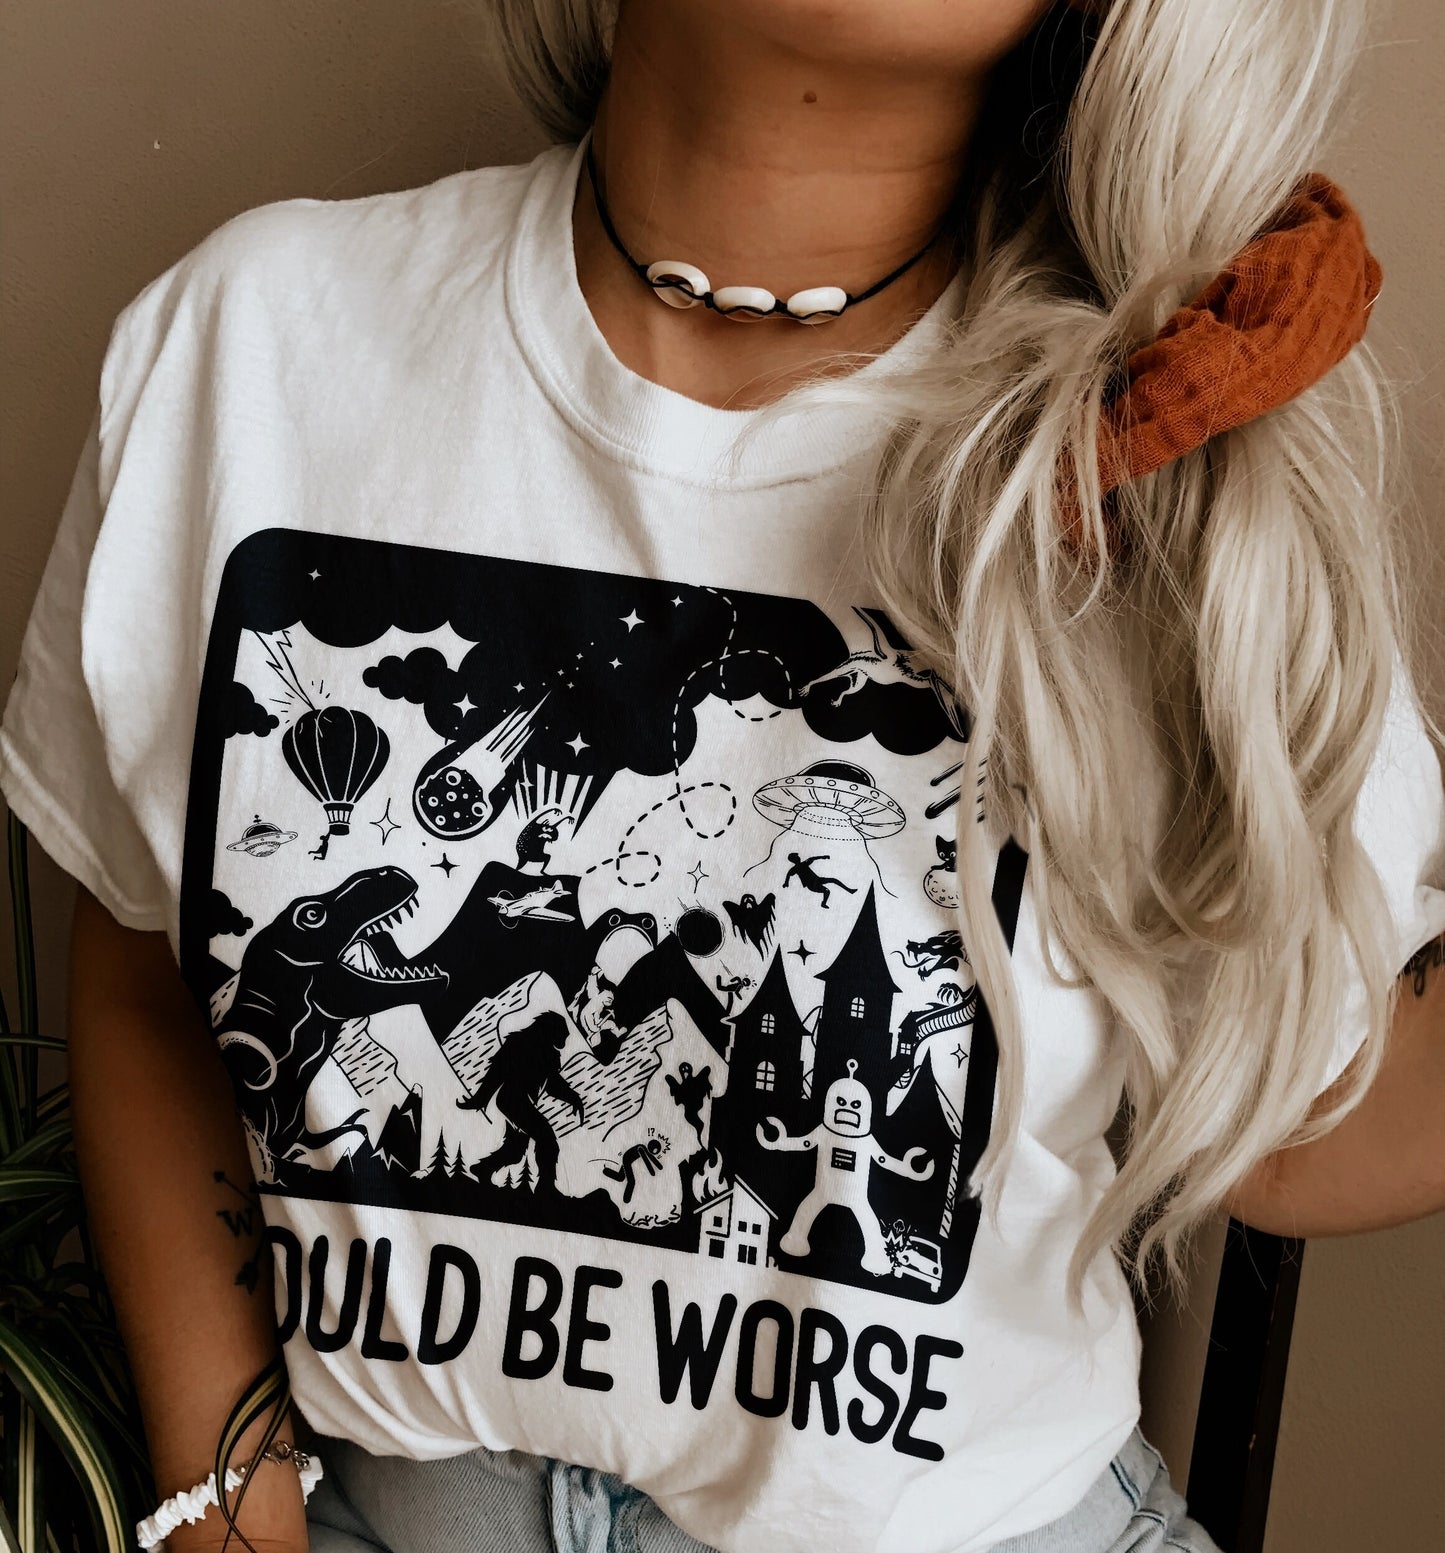 Could Be Worse | Funny Meltdown Graphic Tee T-shirts | UNISEX Relaxed Jersey T-Shirt for Women